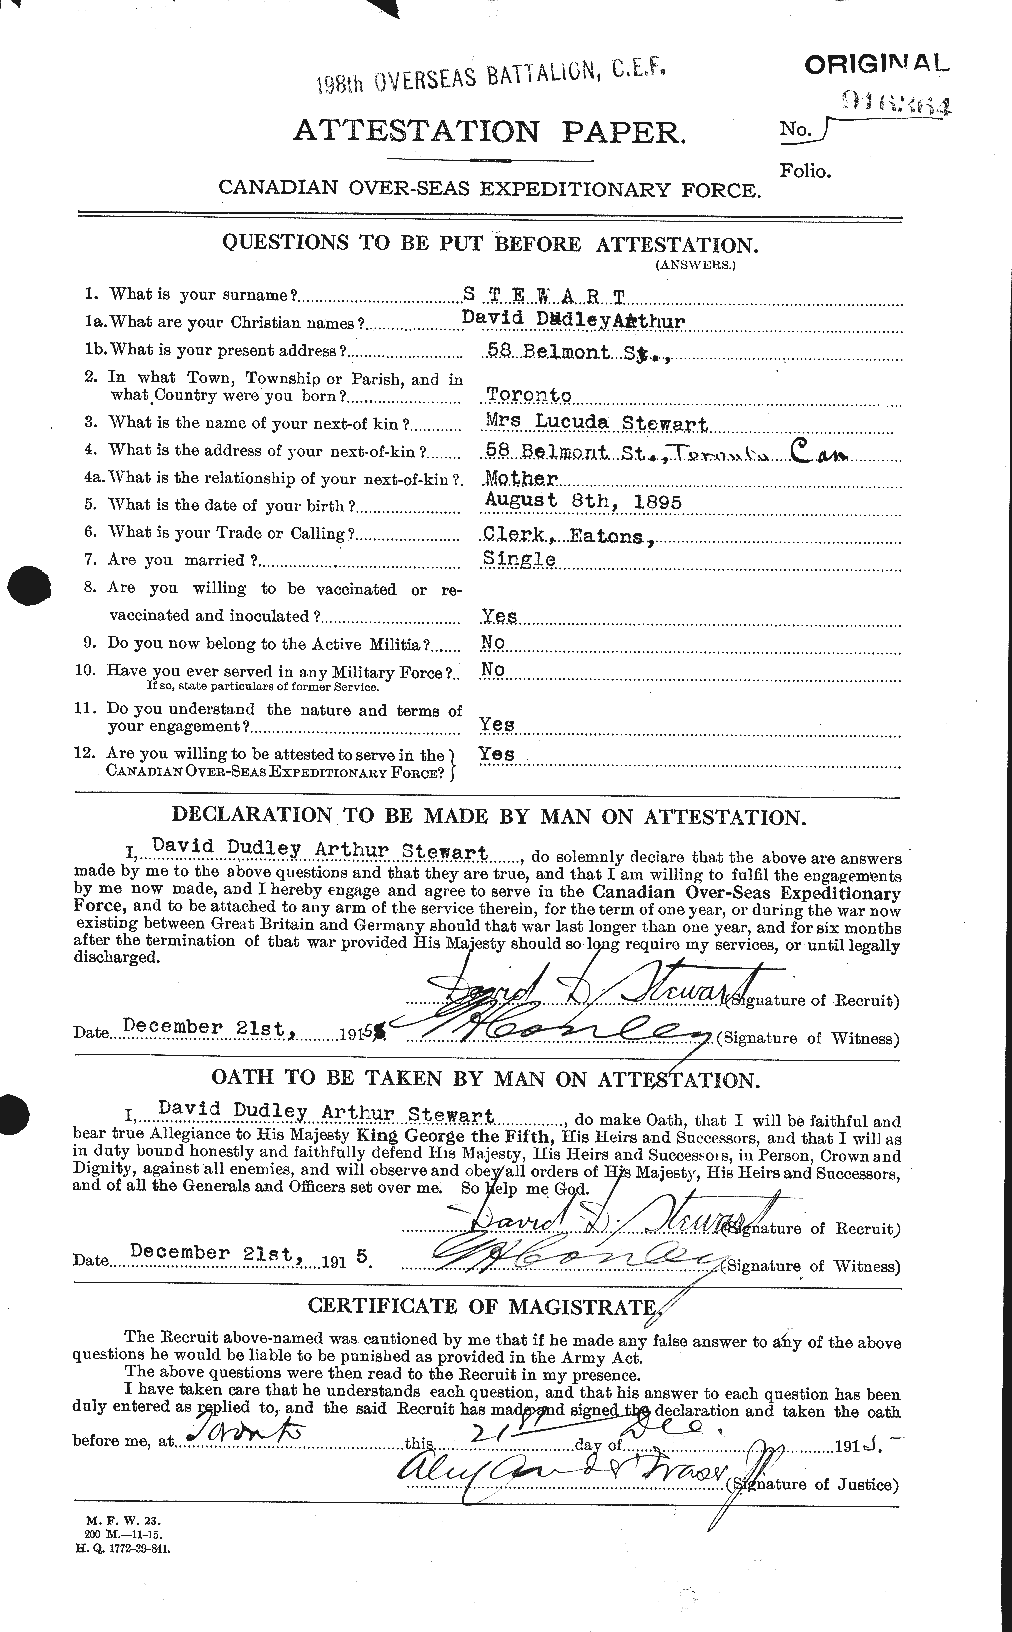 Personnel Records of the First World War - CEF 623228a